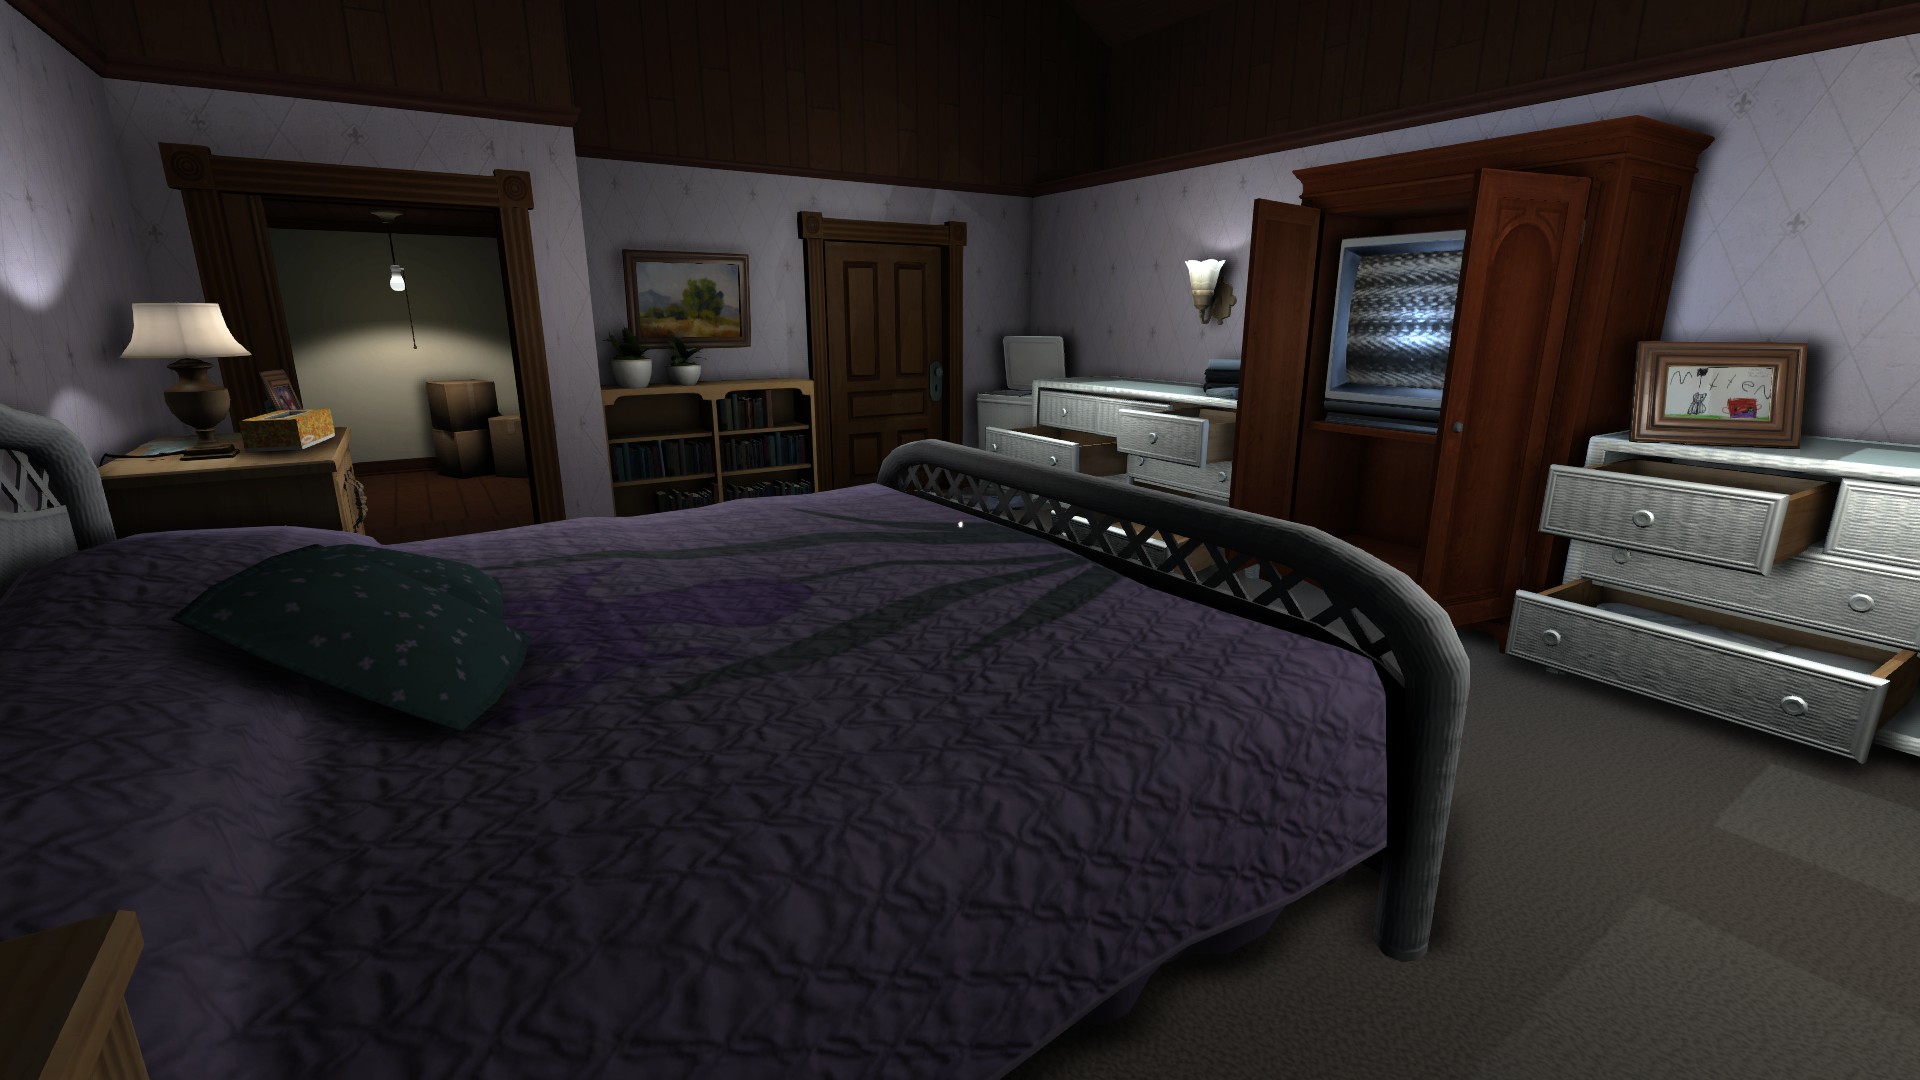 Amazing Gone Home Pictures & Backgrounds